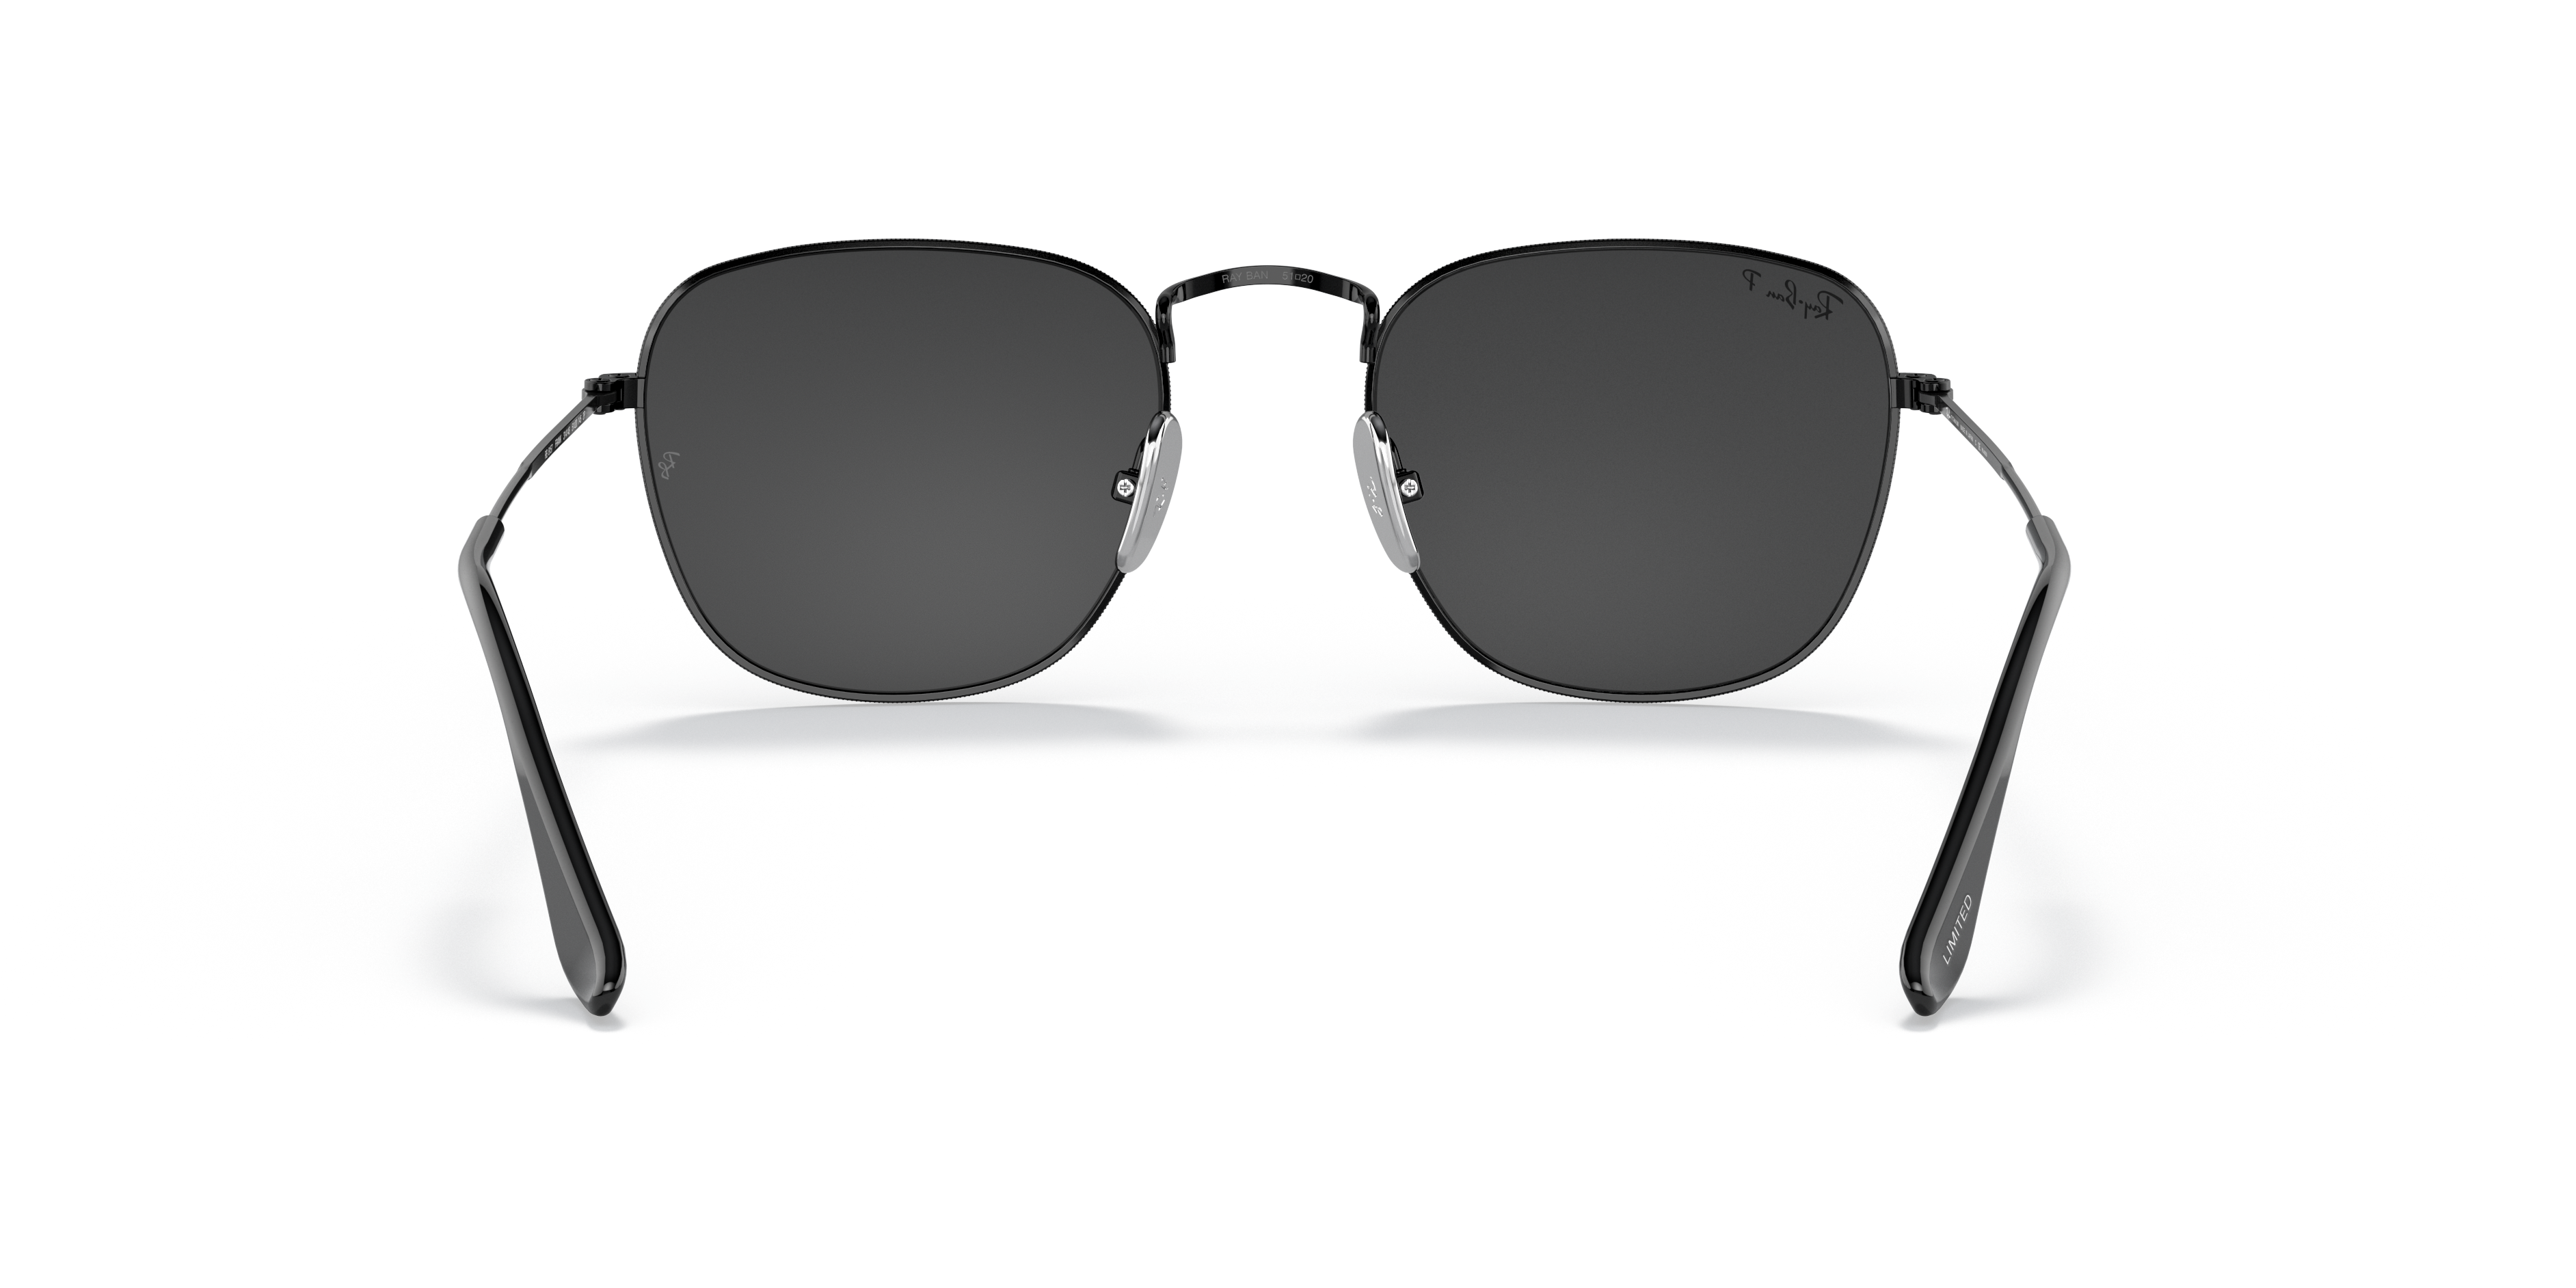 Frank Titanium Limited Edition Sunglasses in Black and Black | Ray 